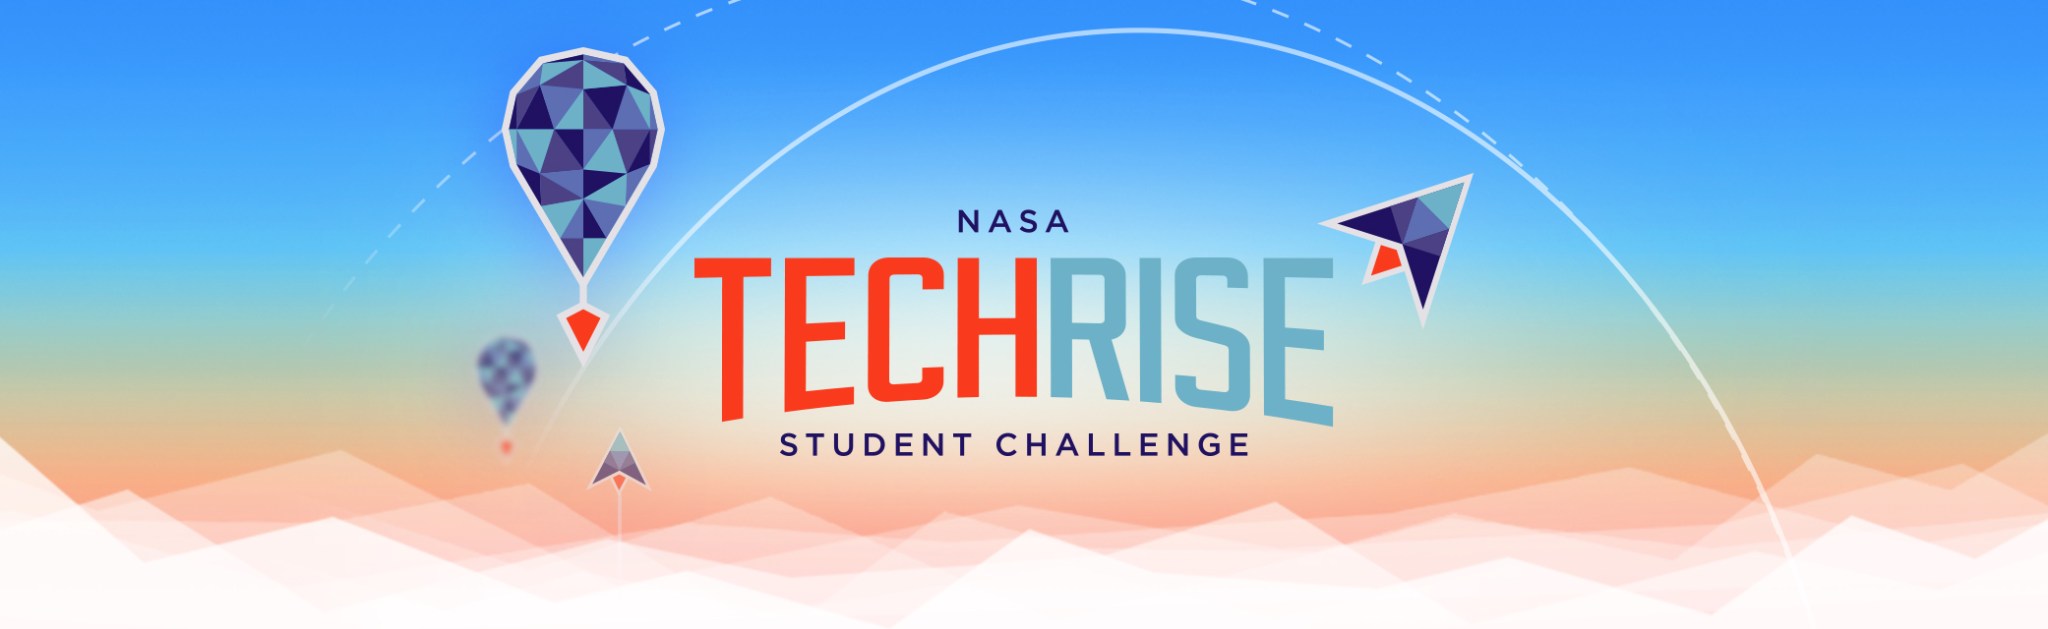 The NASA TechRise Student Challenge invites teams of sixth to 12th-grade students to design, build, and launch experiments on suborbital rockets and balloon flights during the upcoming 2021/2022 school year.